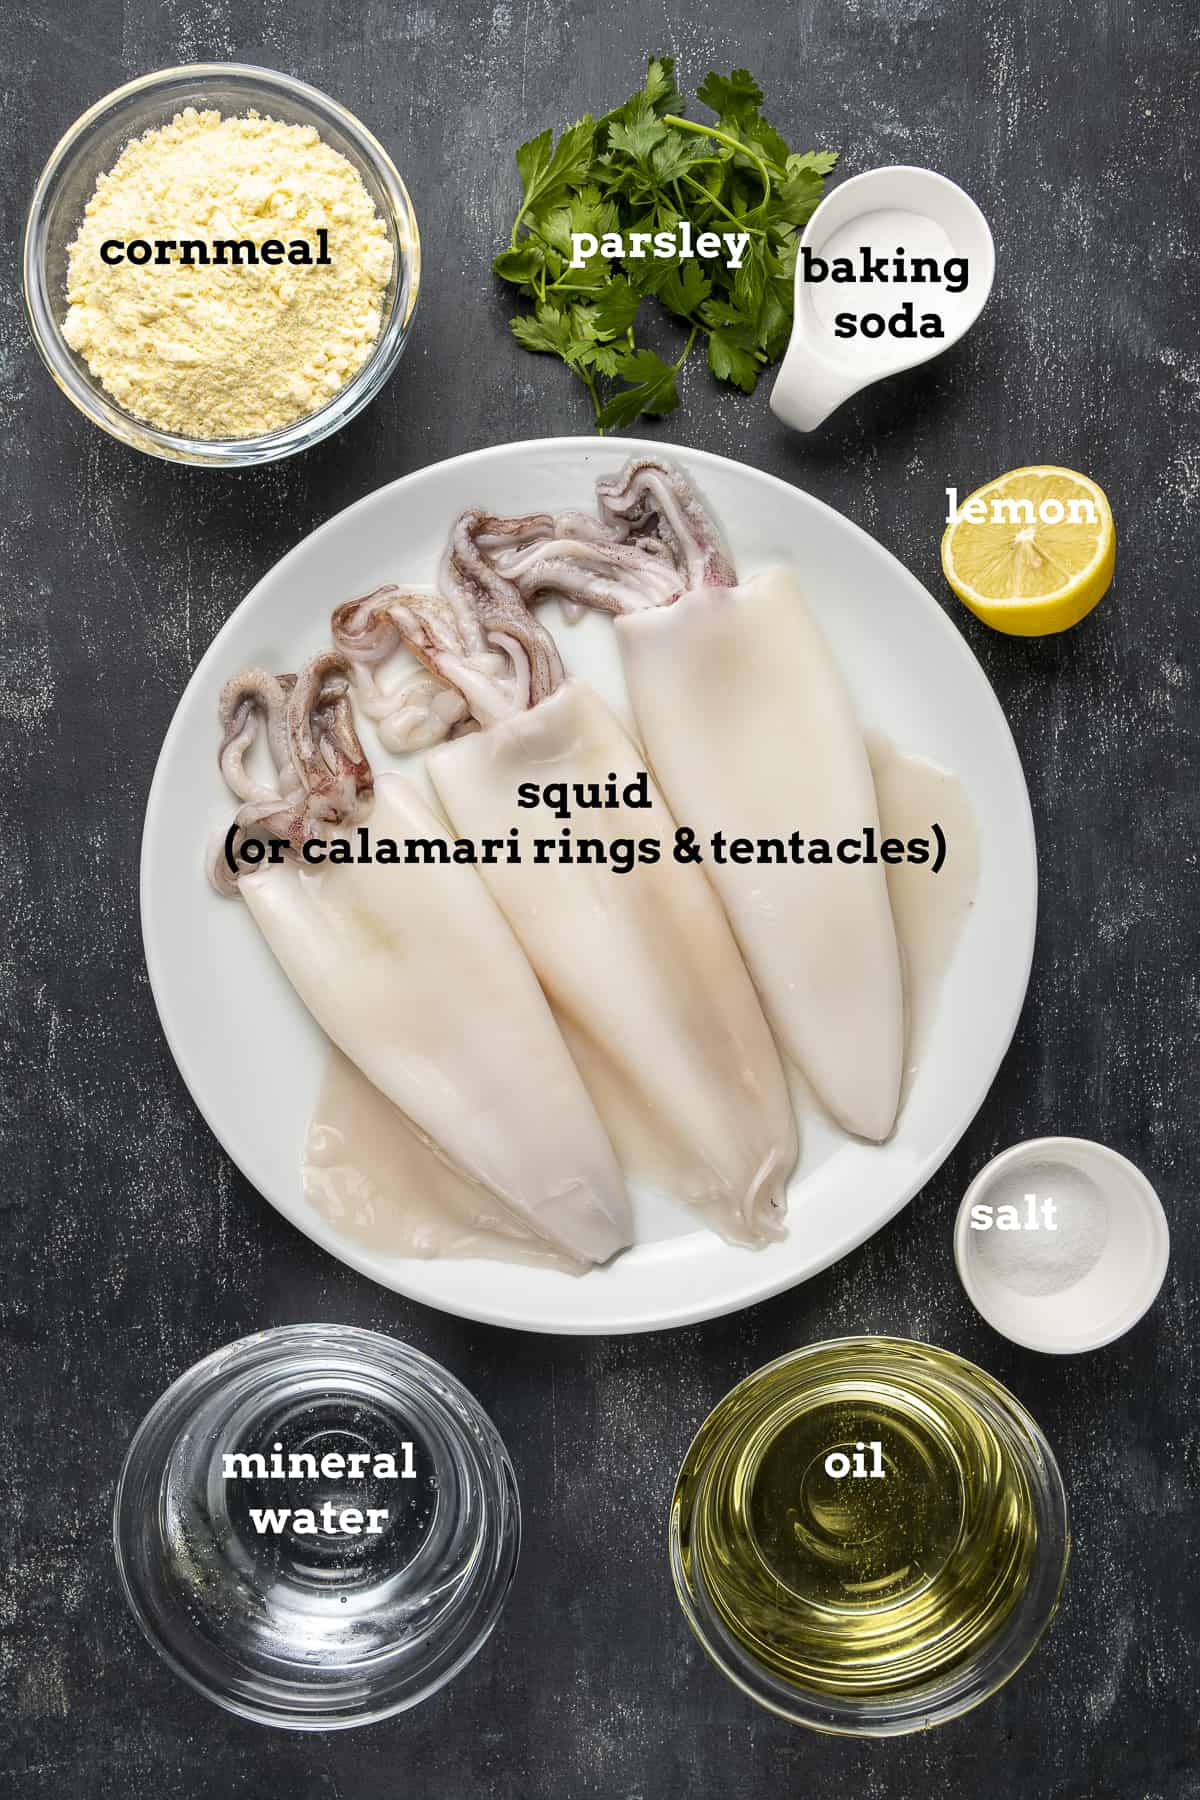 Whole squids, cornmeal, parsley, baking soda, lemon, salt, oil and mineral water on a dark background.